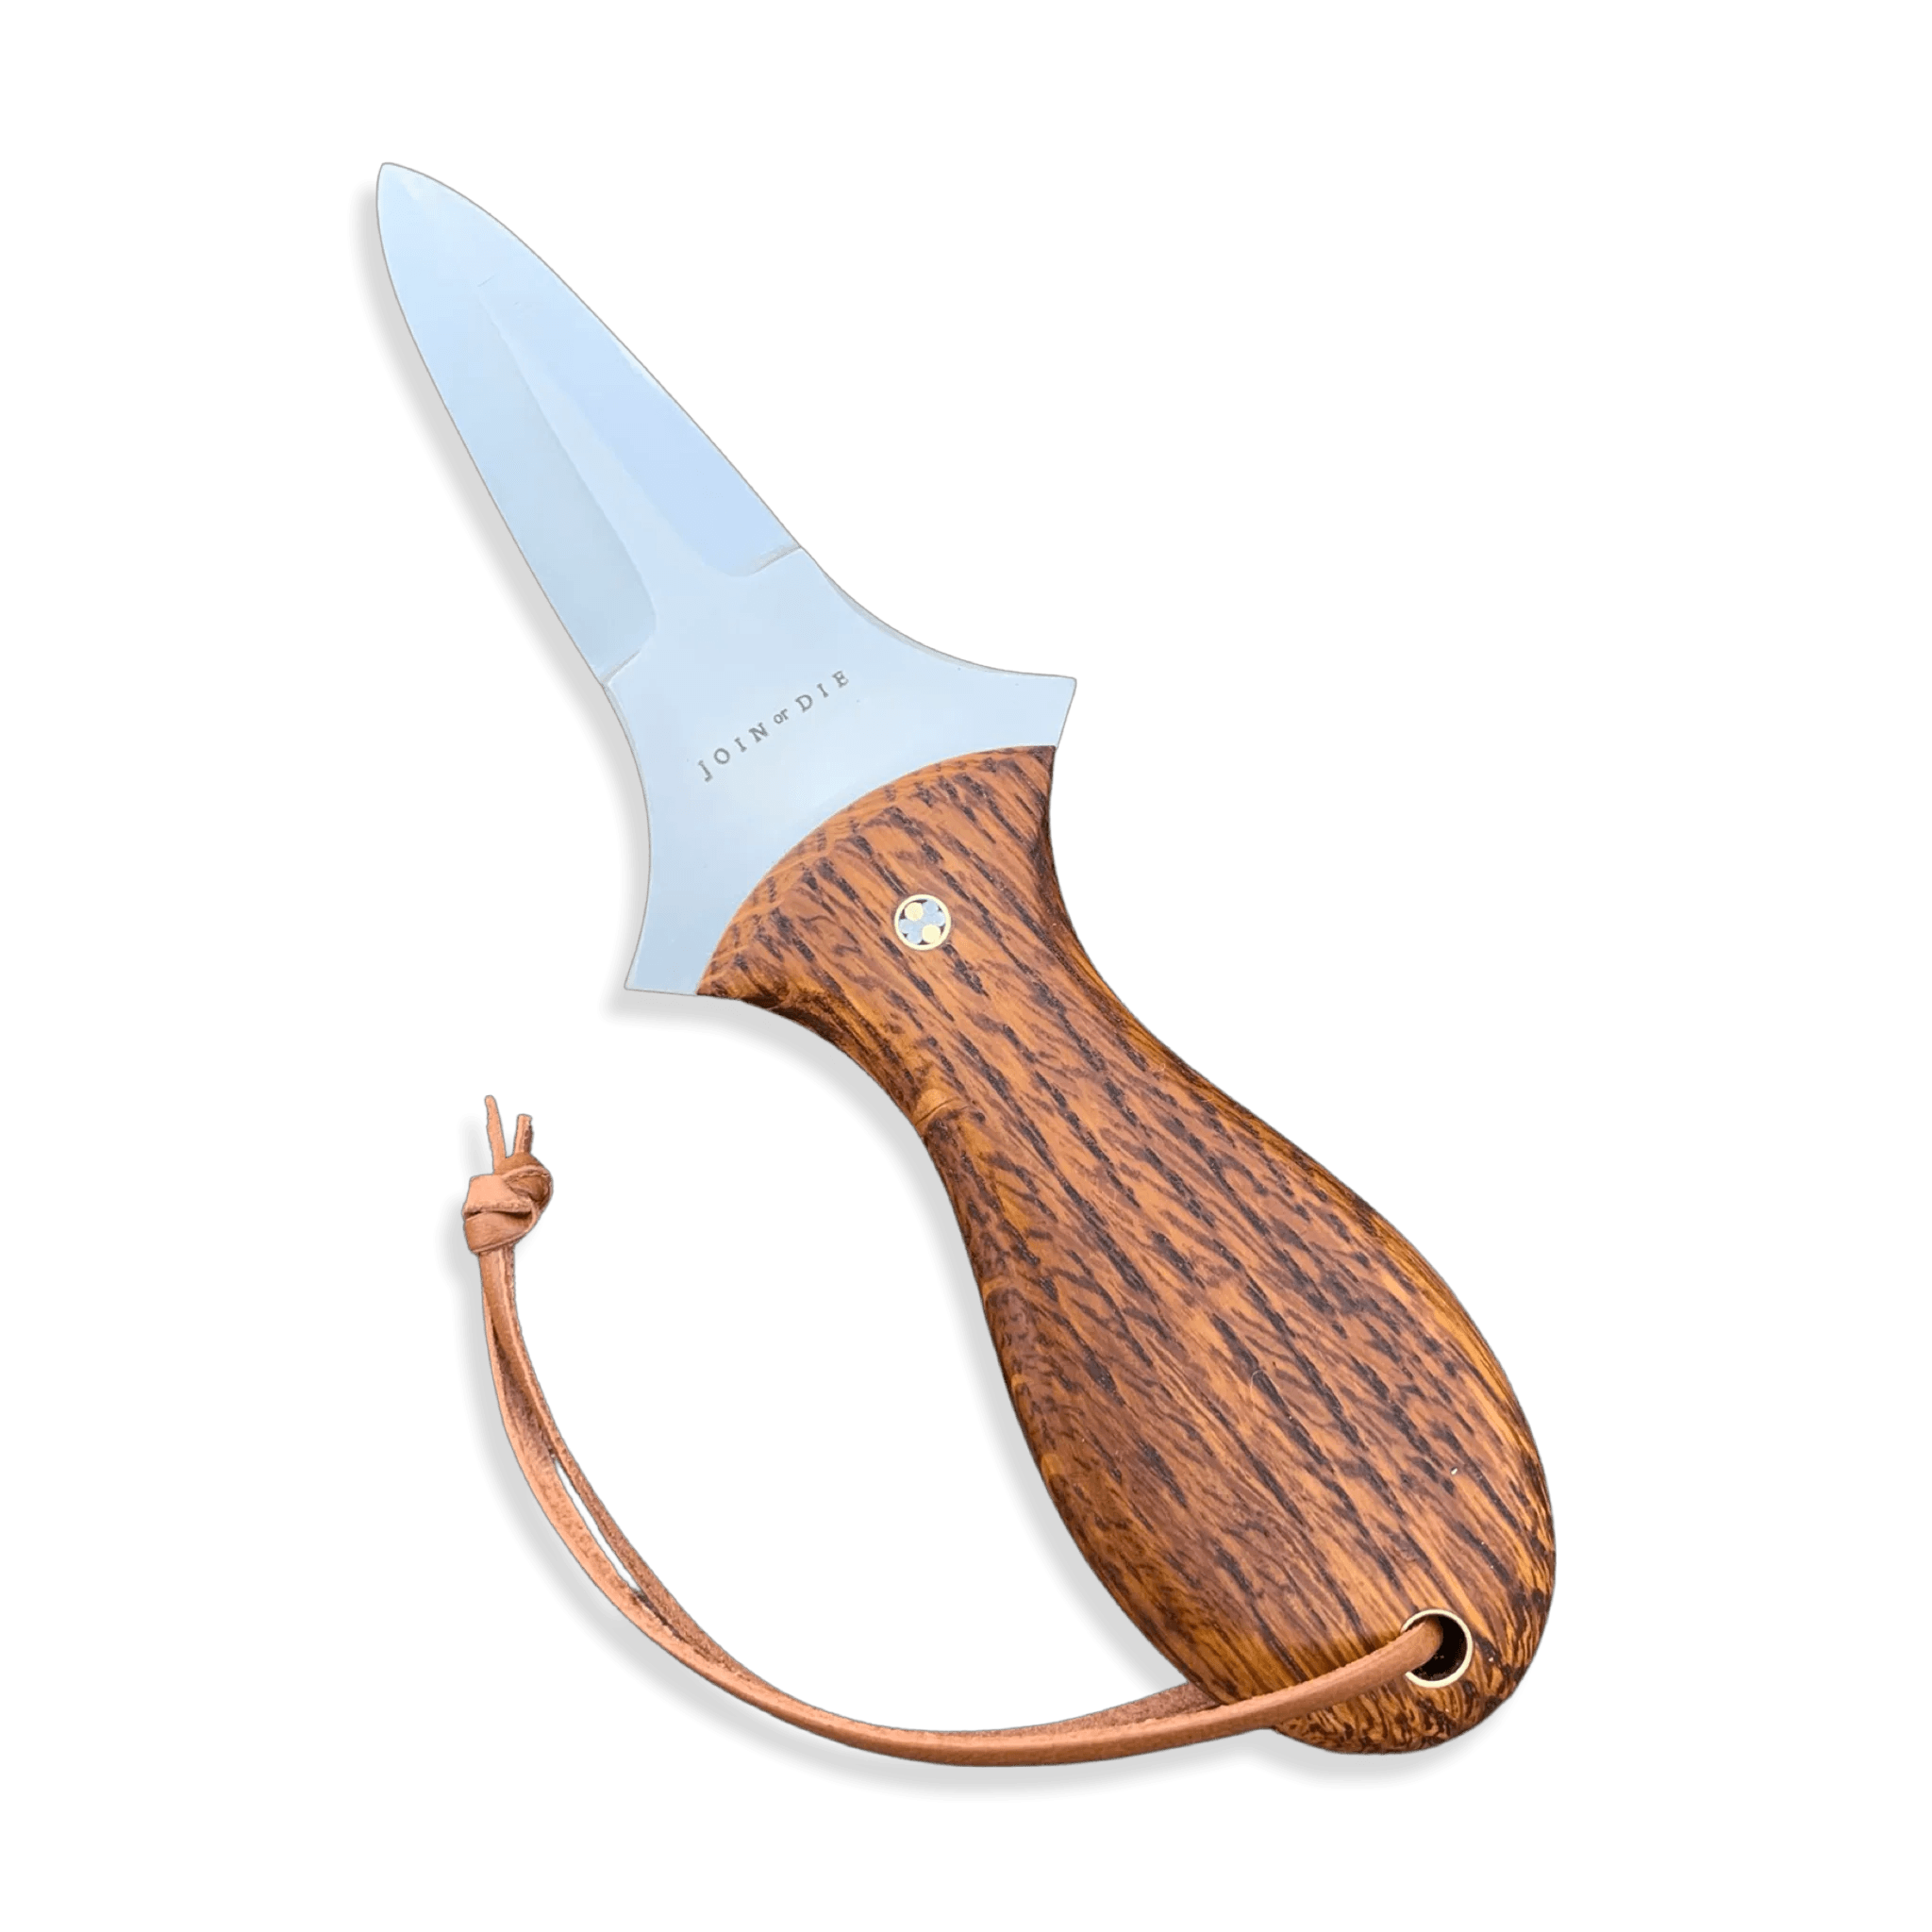 Join or Die Oyster Knife Shucker Tobacco Barn wood handle